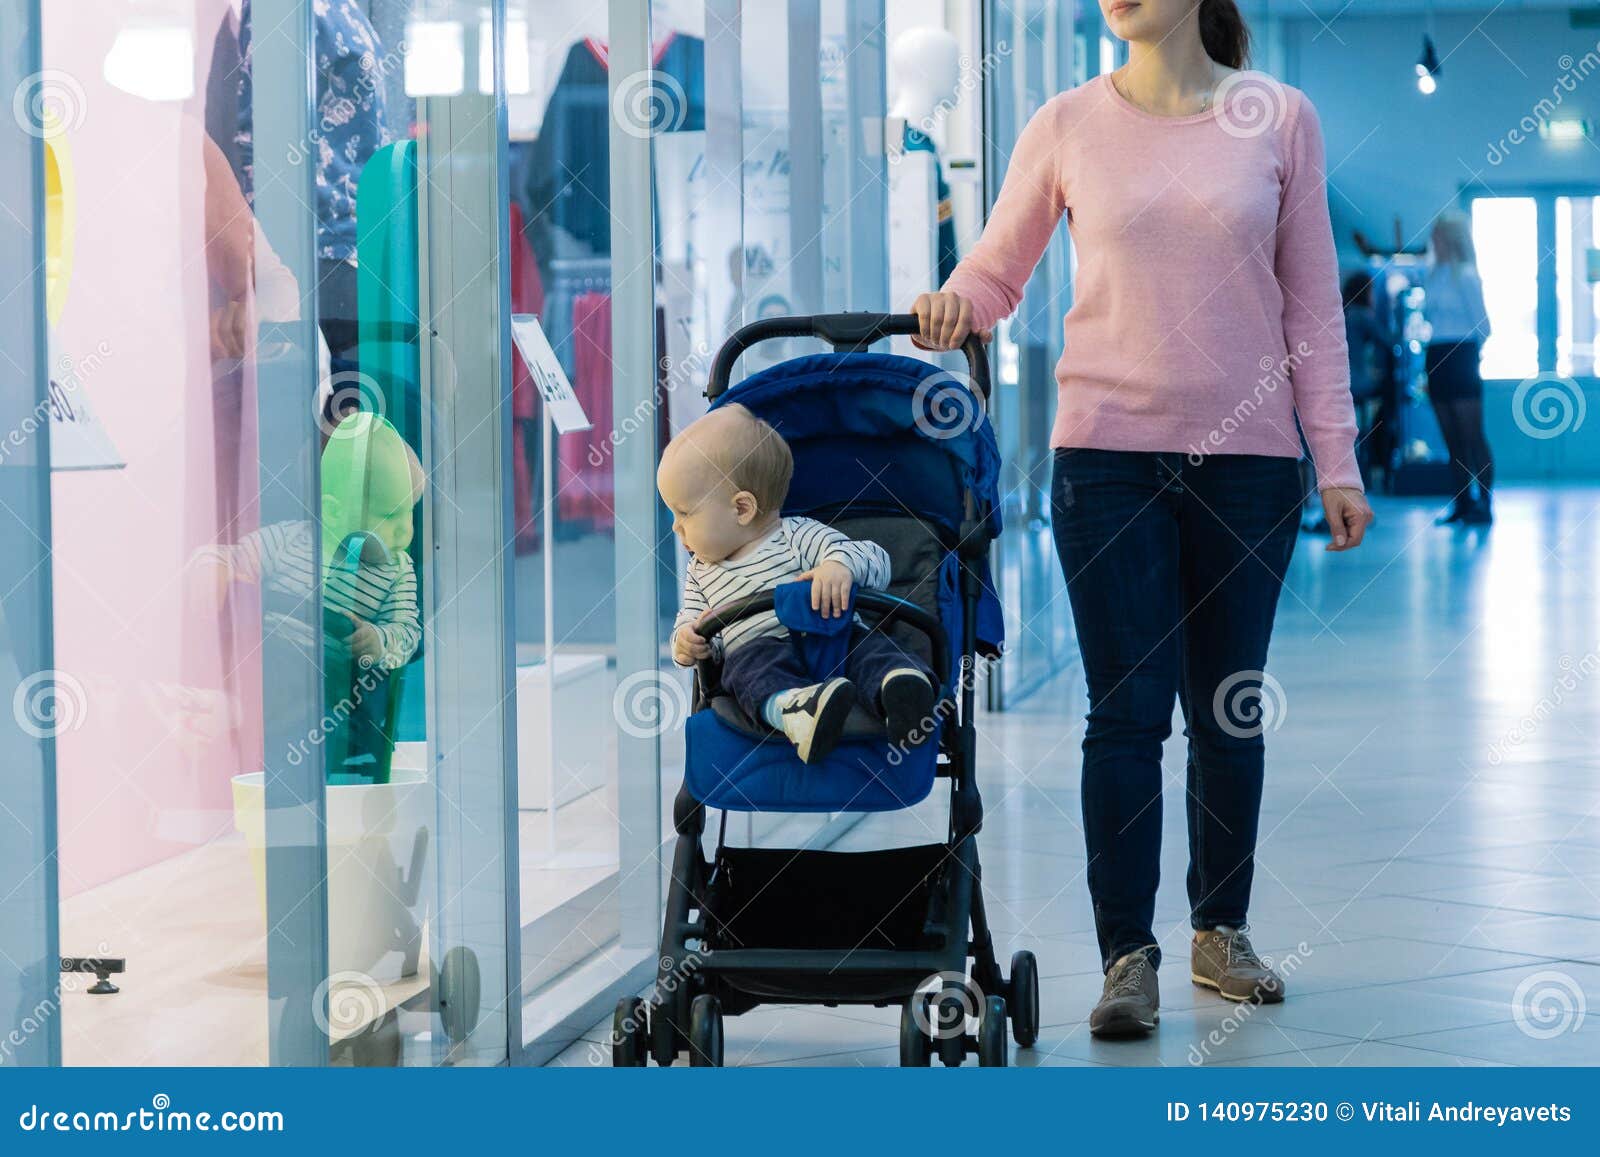 shopping with a stroller